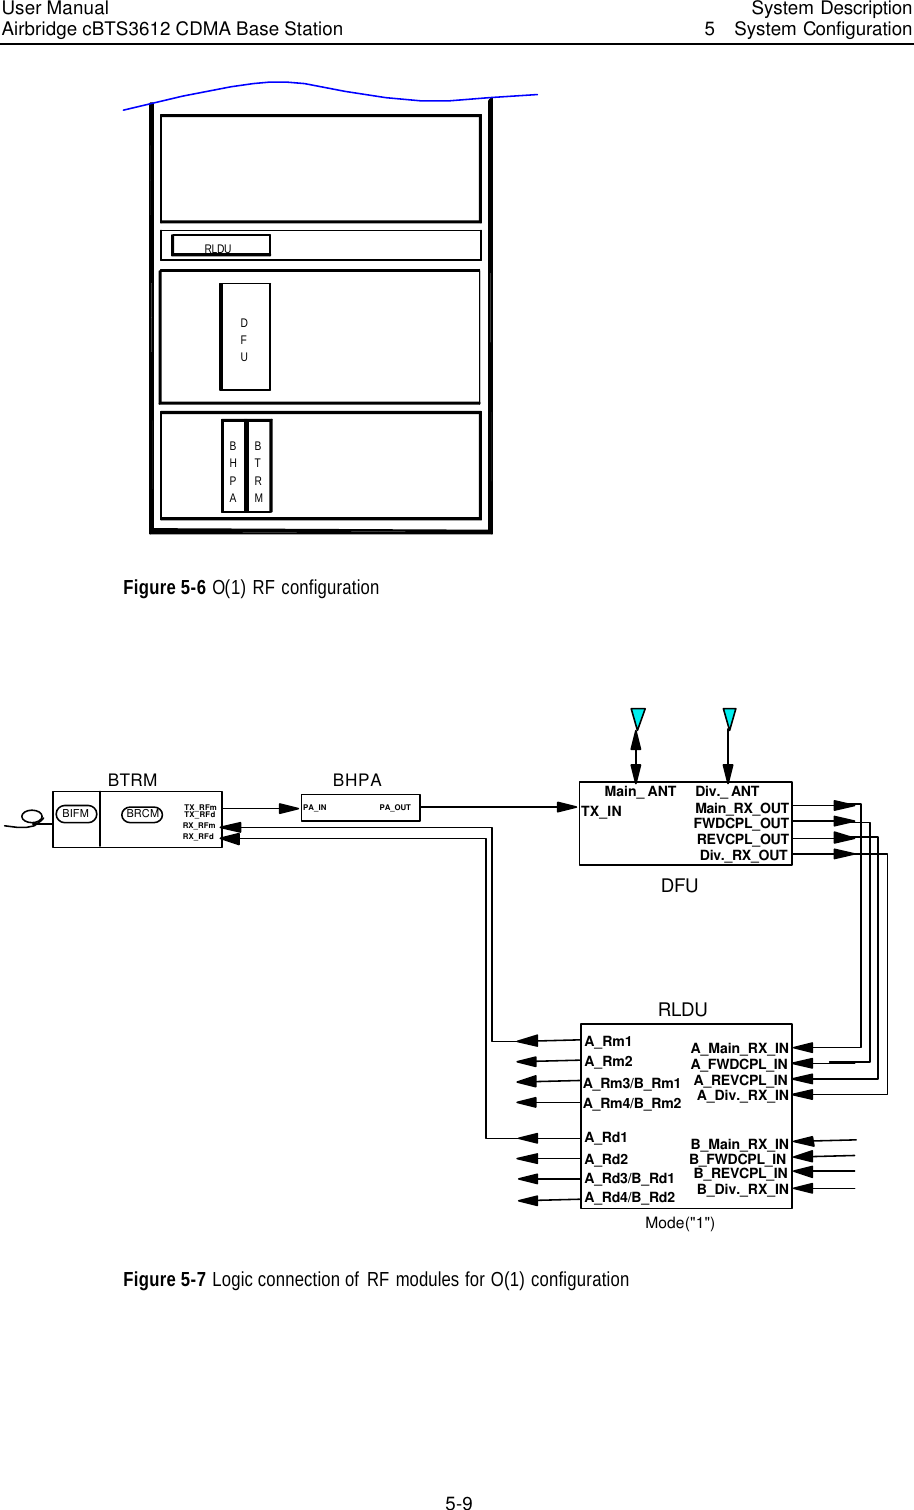 User Manual Airbridge cBTS3612 CDMA Base Station   System Description5  System Configuration 5-9 DFURLDUBHPABTRM Figure 5-6 O(1) RF configuration  BHPAPA_IN PA_OUT TX_INMain_ ANT Div._ ANTMain_RX_OUTDiv._RX_OUTFWDCPL_OUTREVCPL_OUTDFUA_Main_RX_INA_Div._RX_INA_FWDCPL_INA_REVCPL_INB_Main_RX_INB_Div._RX_INB_FWDCPL_INB_REVCPL_INA_Rm1A_Rm2A_Rm3/B_Rm1A_Rm4/B_Rm2A_Rd1A_Rd2A_Rd3/B_Rd1A_Rd4/B_Rd2RLDU    Mode(&quot;1&quot;)BTRMTX_RFmRX_RFmRX_RFdBRCMBIFM TX_RFd Figure 5-7 Logic connection of  RF modules for O(1) configuration  